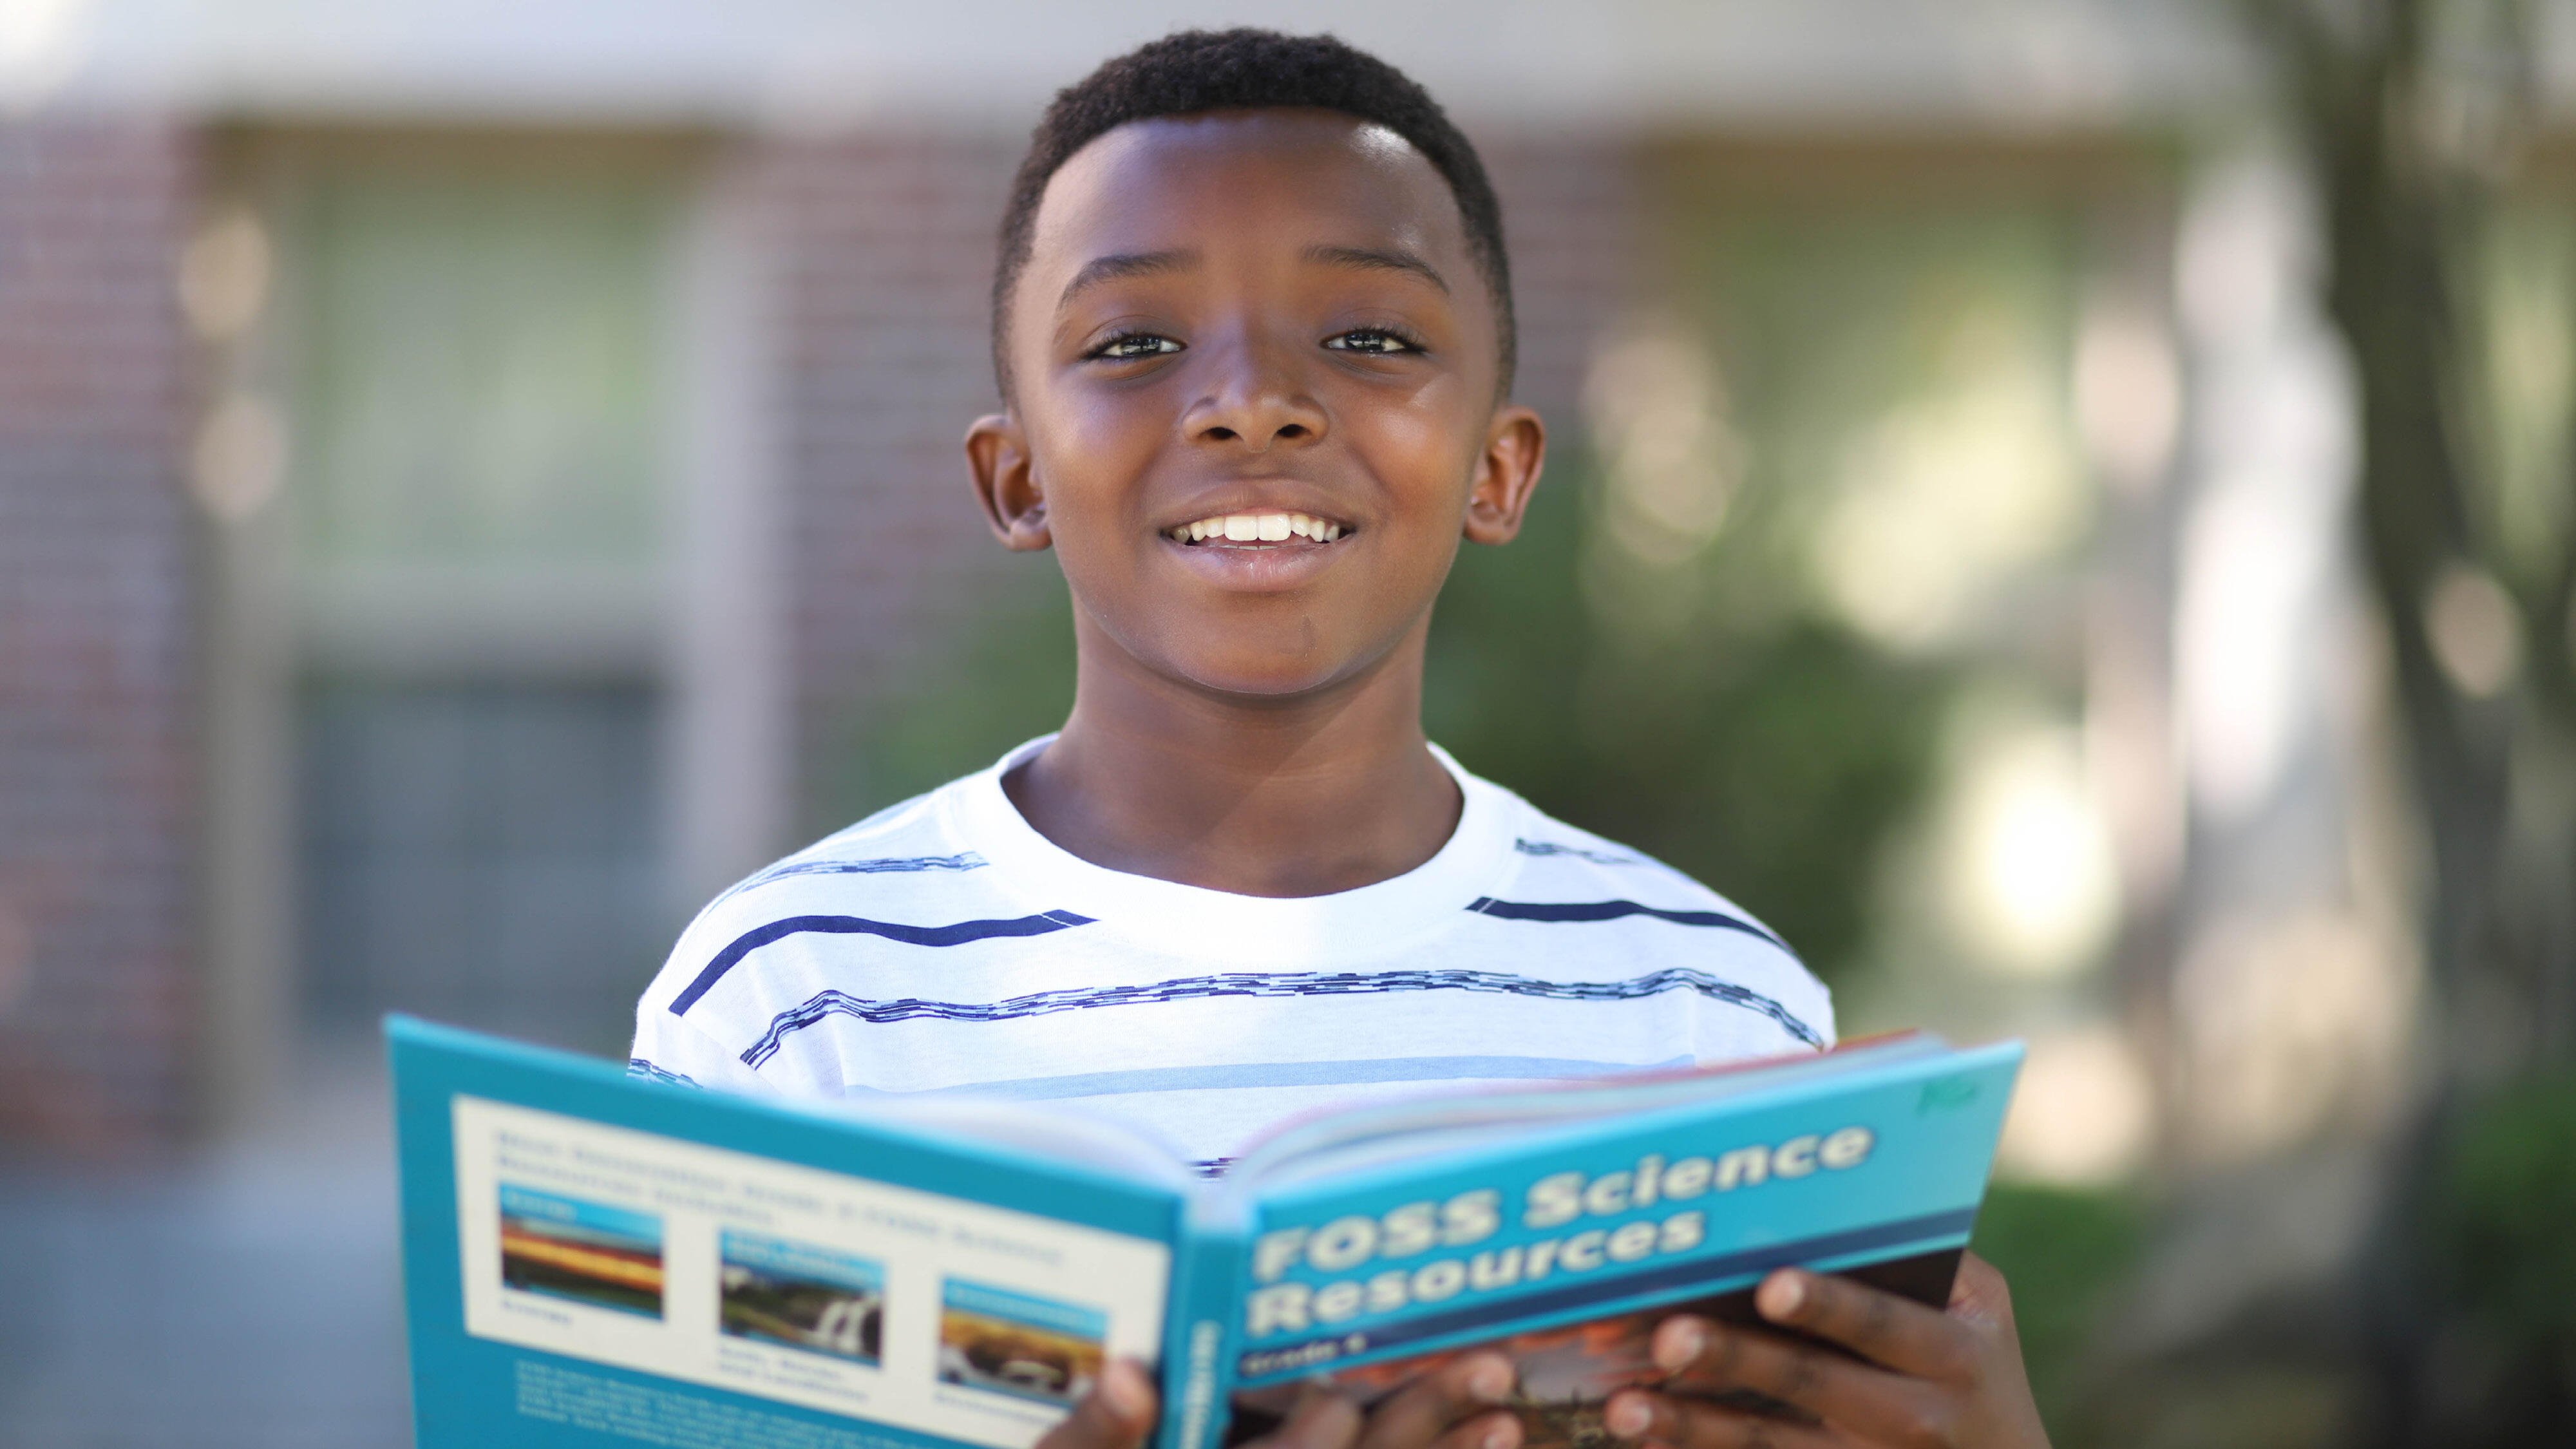 Student smiling and holding a science textbook